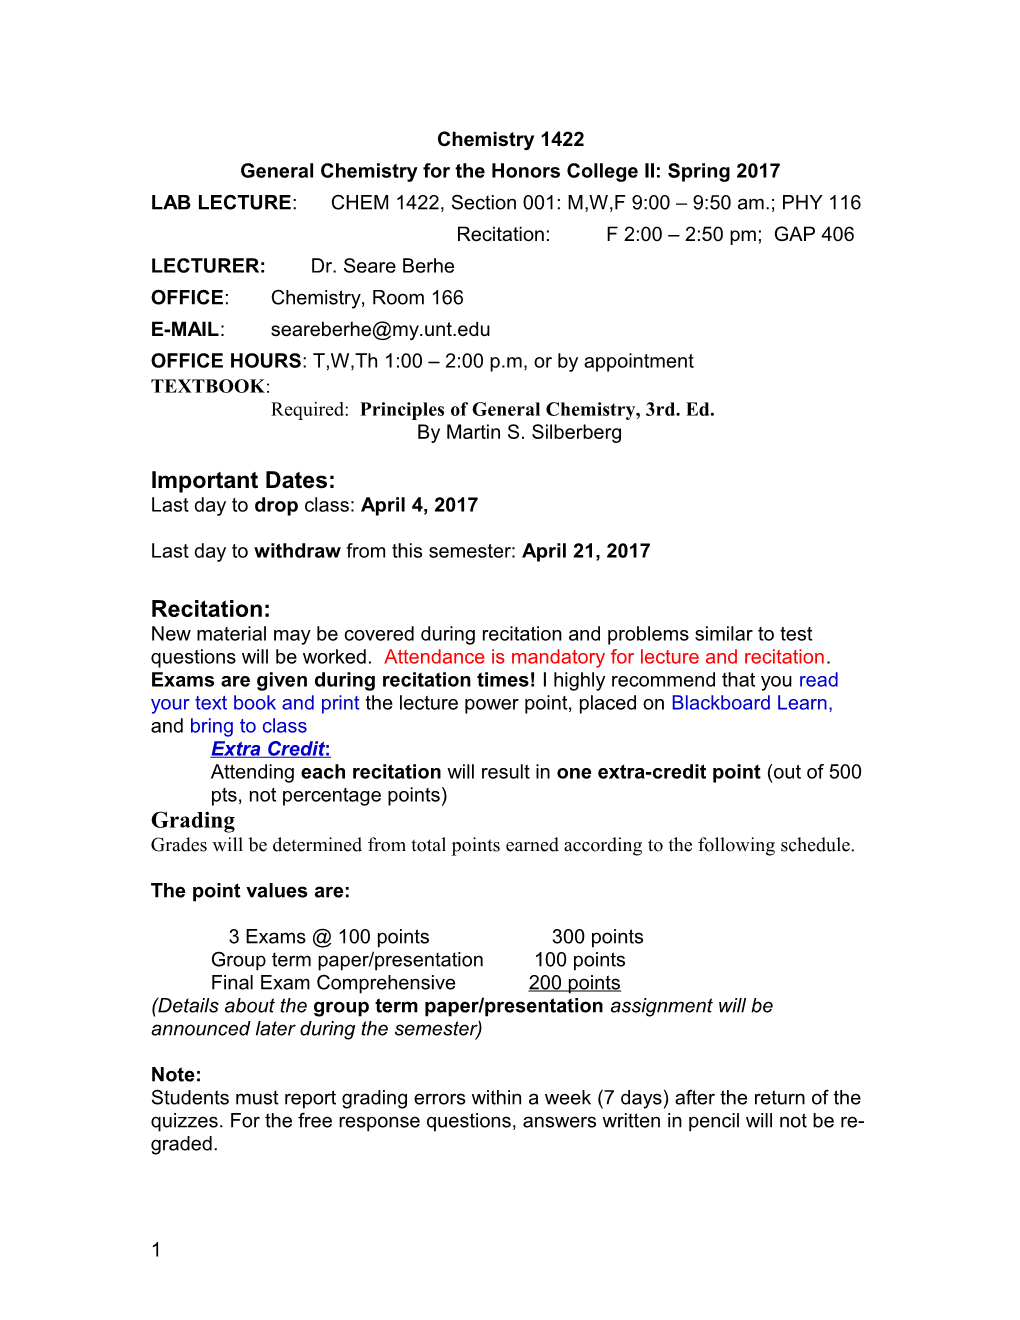 General Chemistry for the Honors College II: Spring 2017